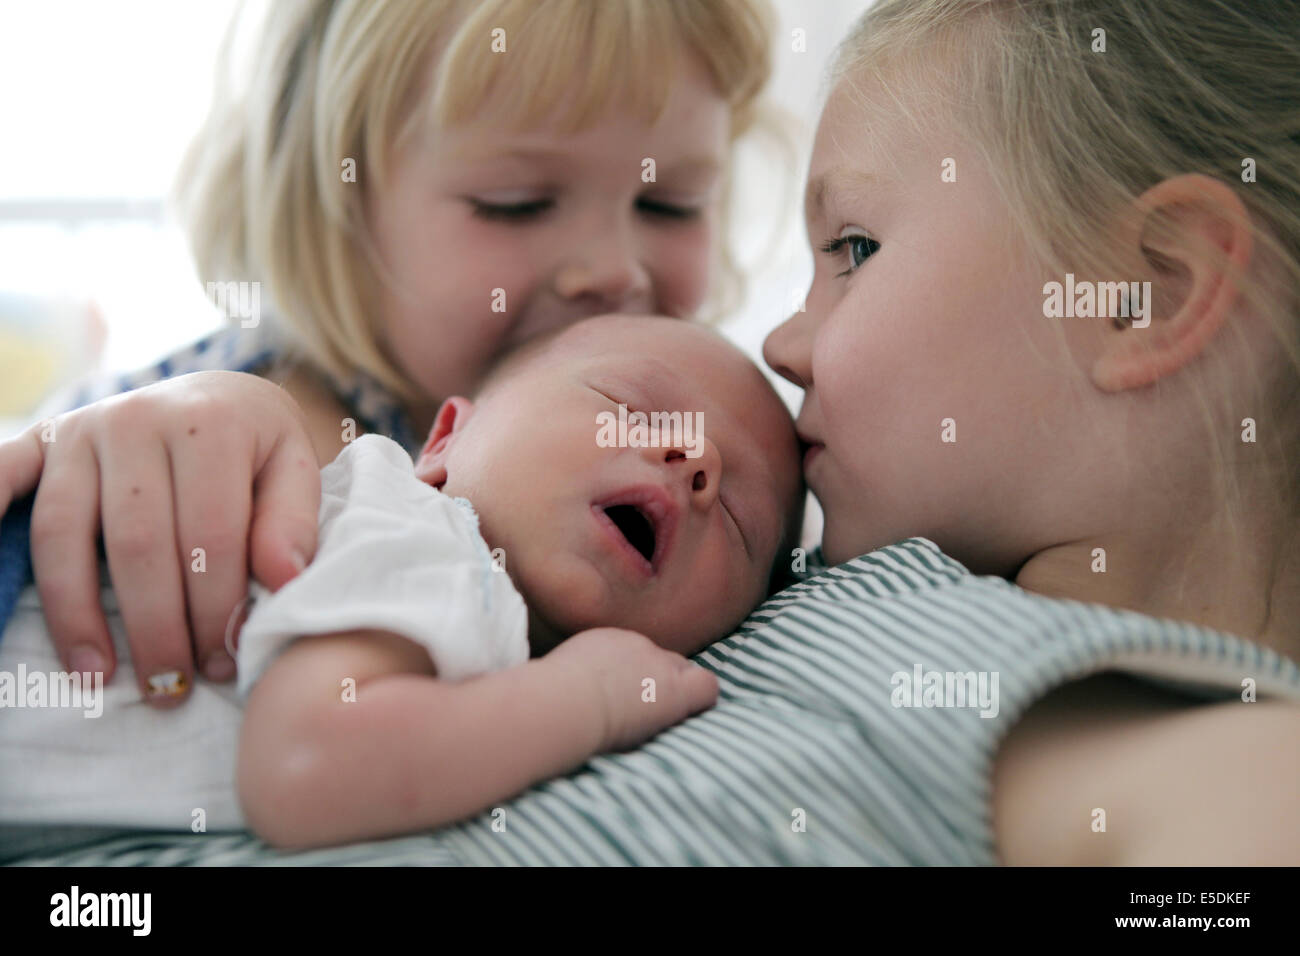 Two little girls kissing their newborn brother Stock Photo